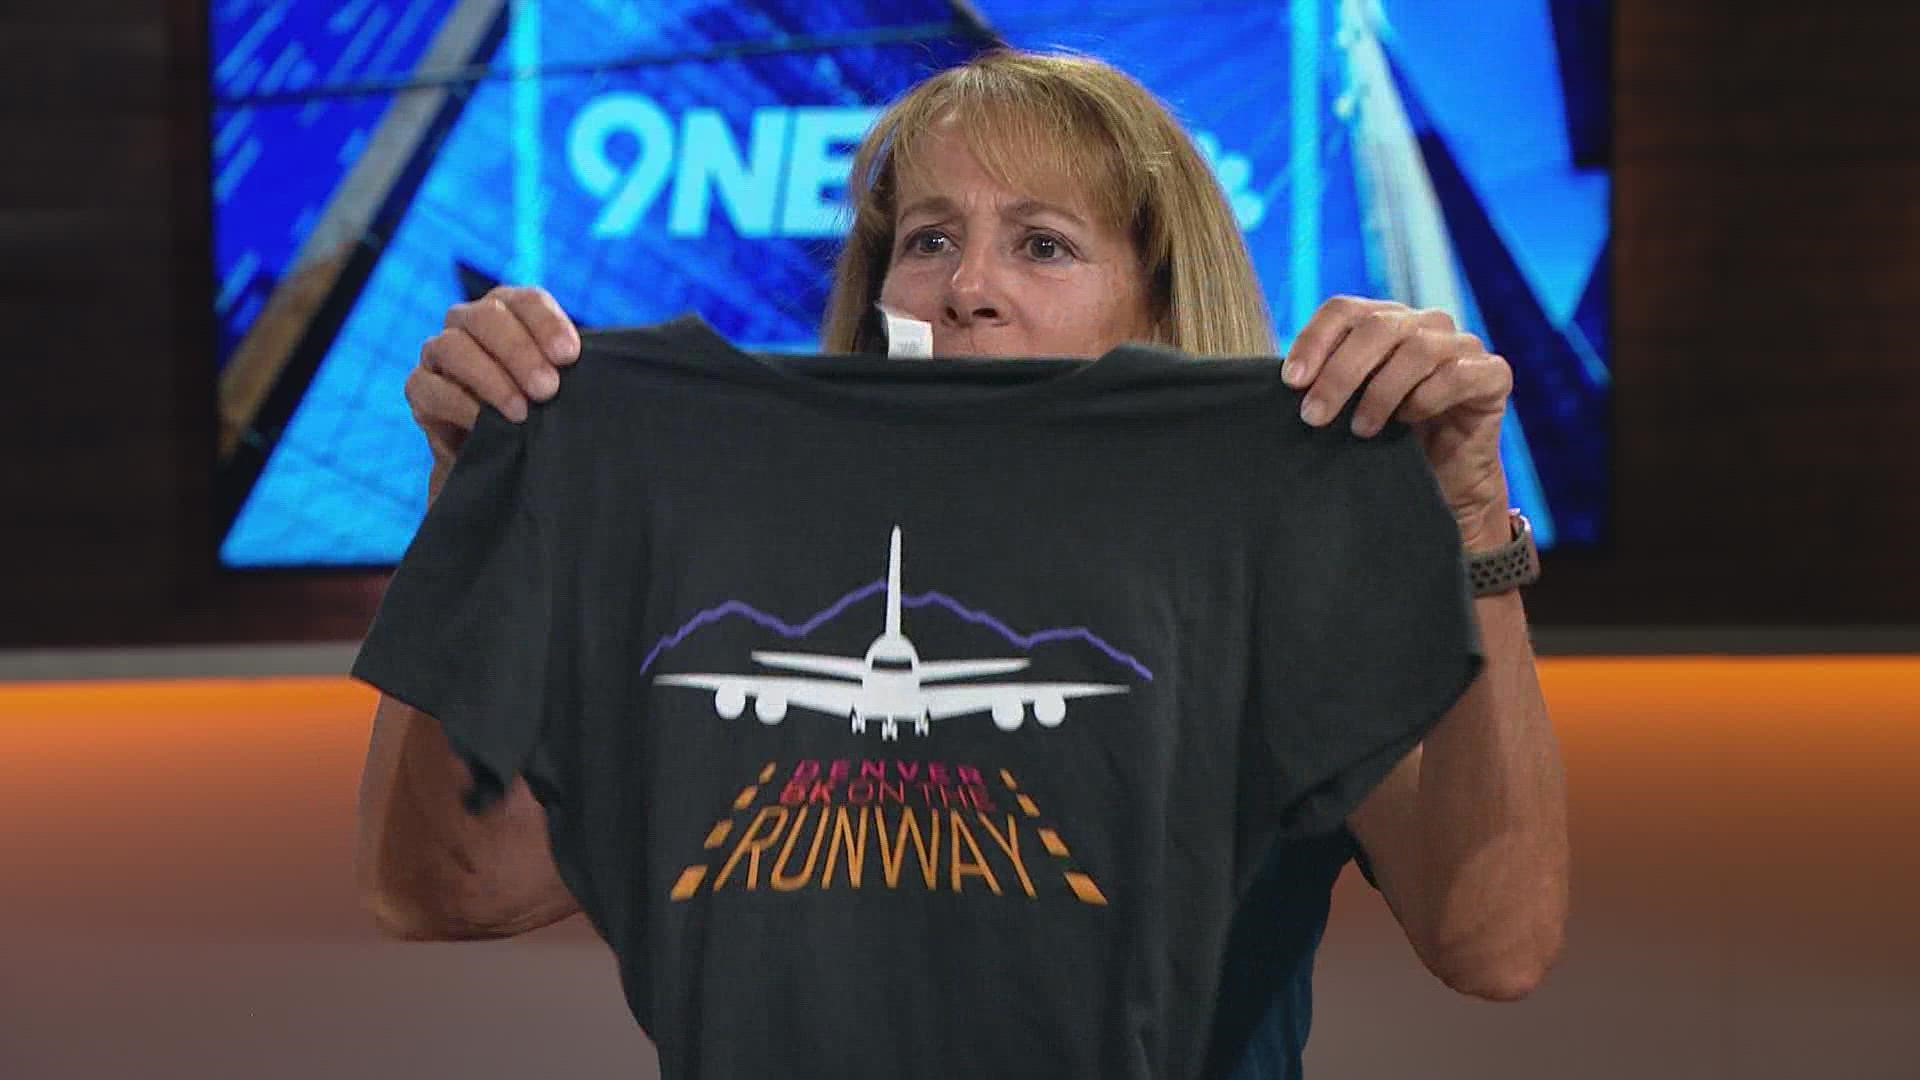 5K on the Runway is scheduled for Saturday, Sept. 10, when runners will gather for a sunrise 5K on a runway at the Denver airport.